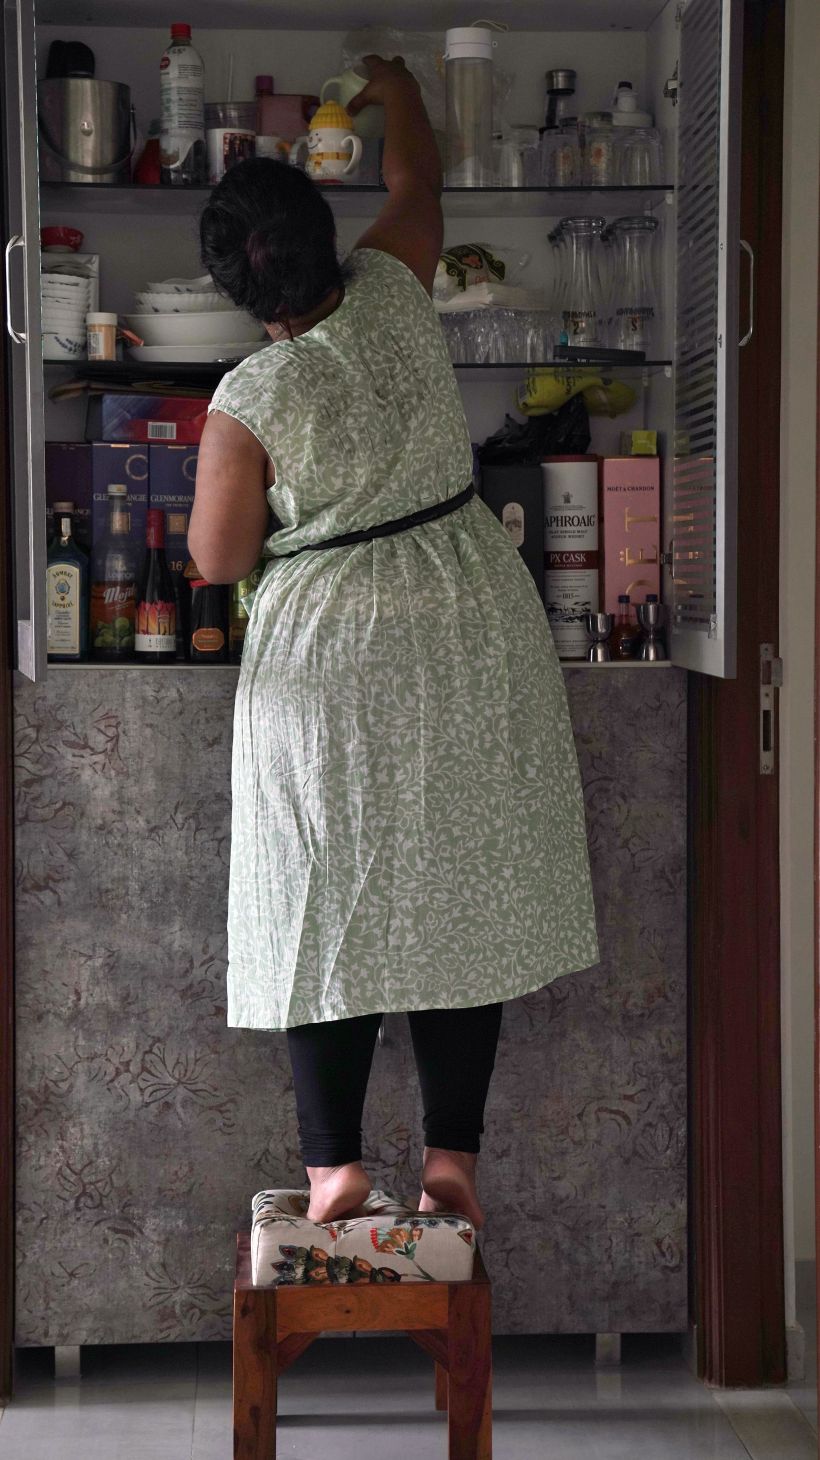 Akanksha stands on a stool in front of her pantry cupboard, lifting onto her toes to reach something in the top shelf